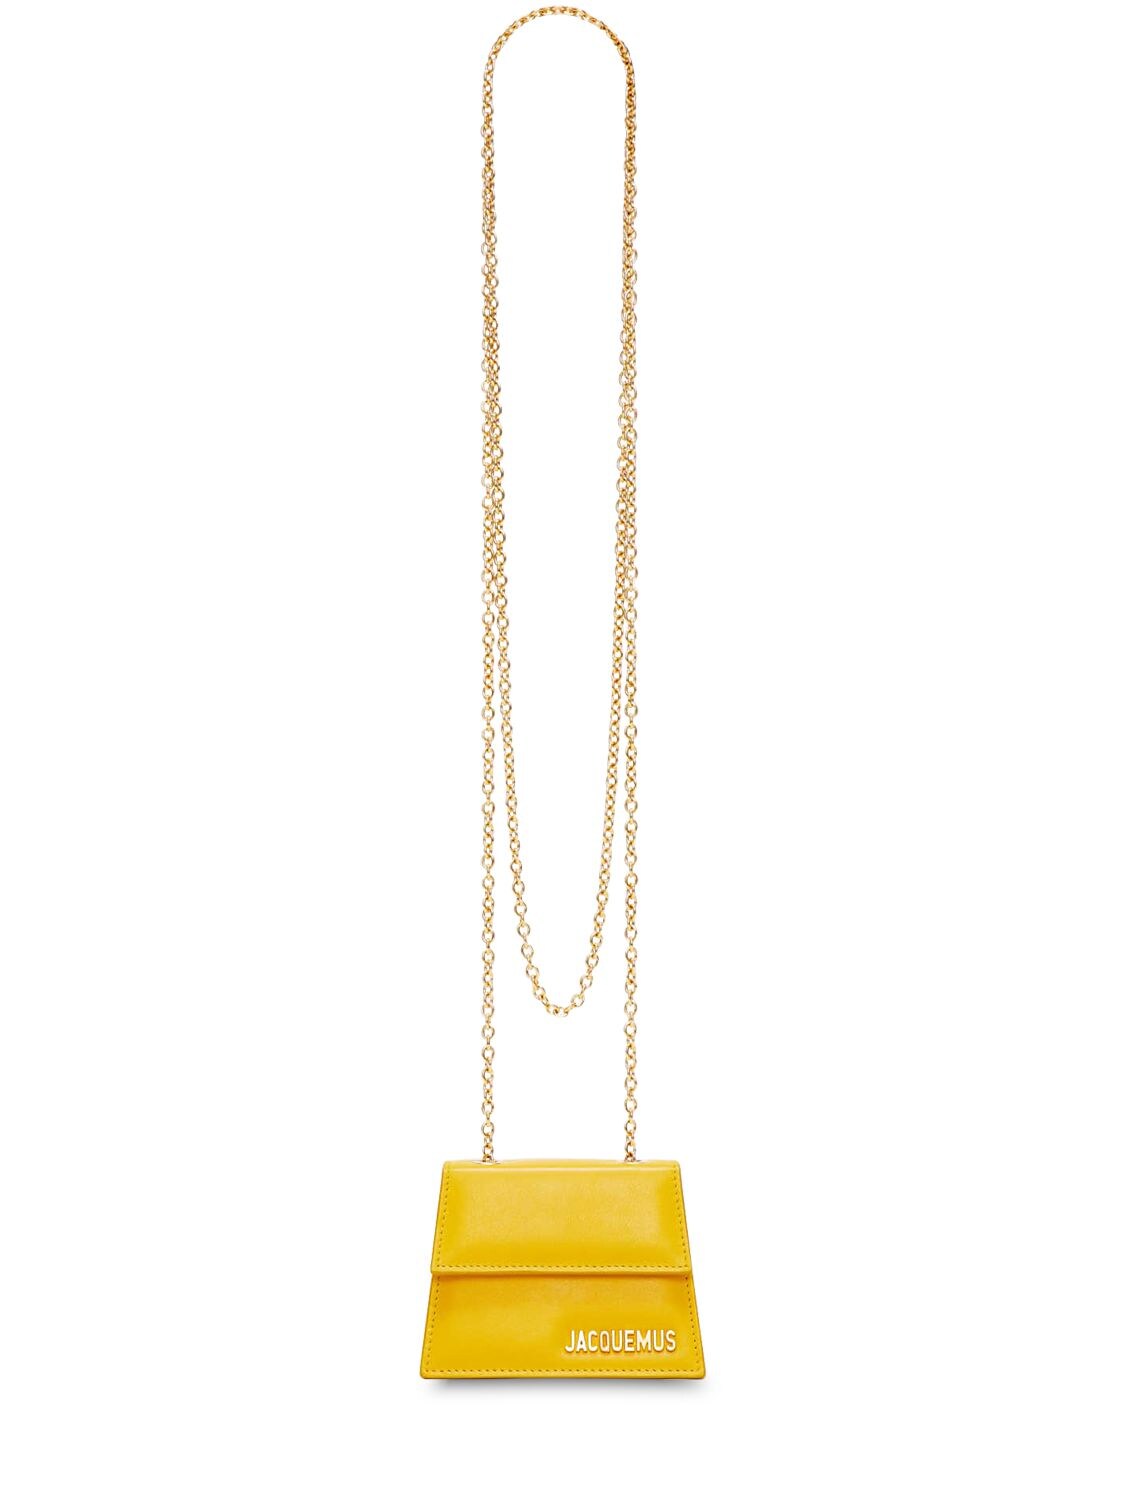 Jacquemus Le Piccolo Micro Leather Bag In Yellow